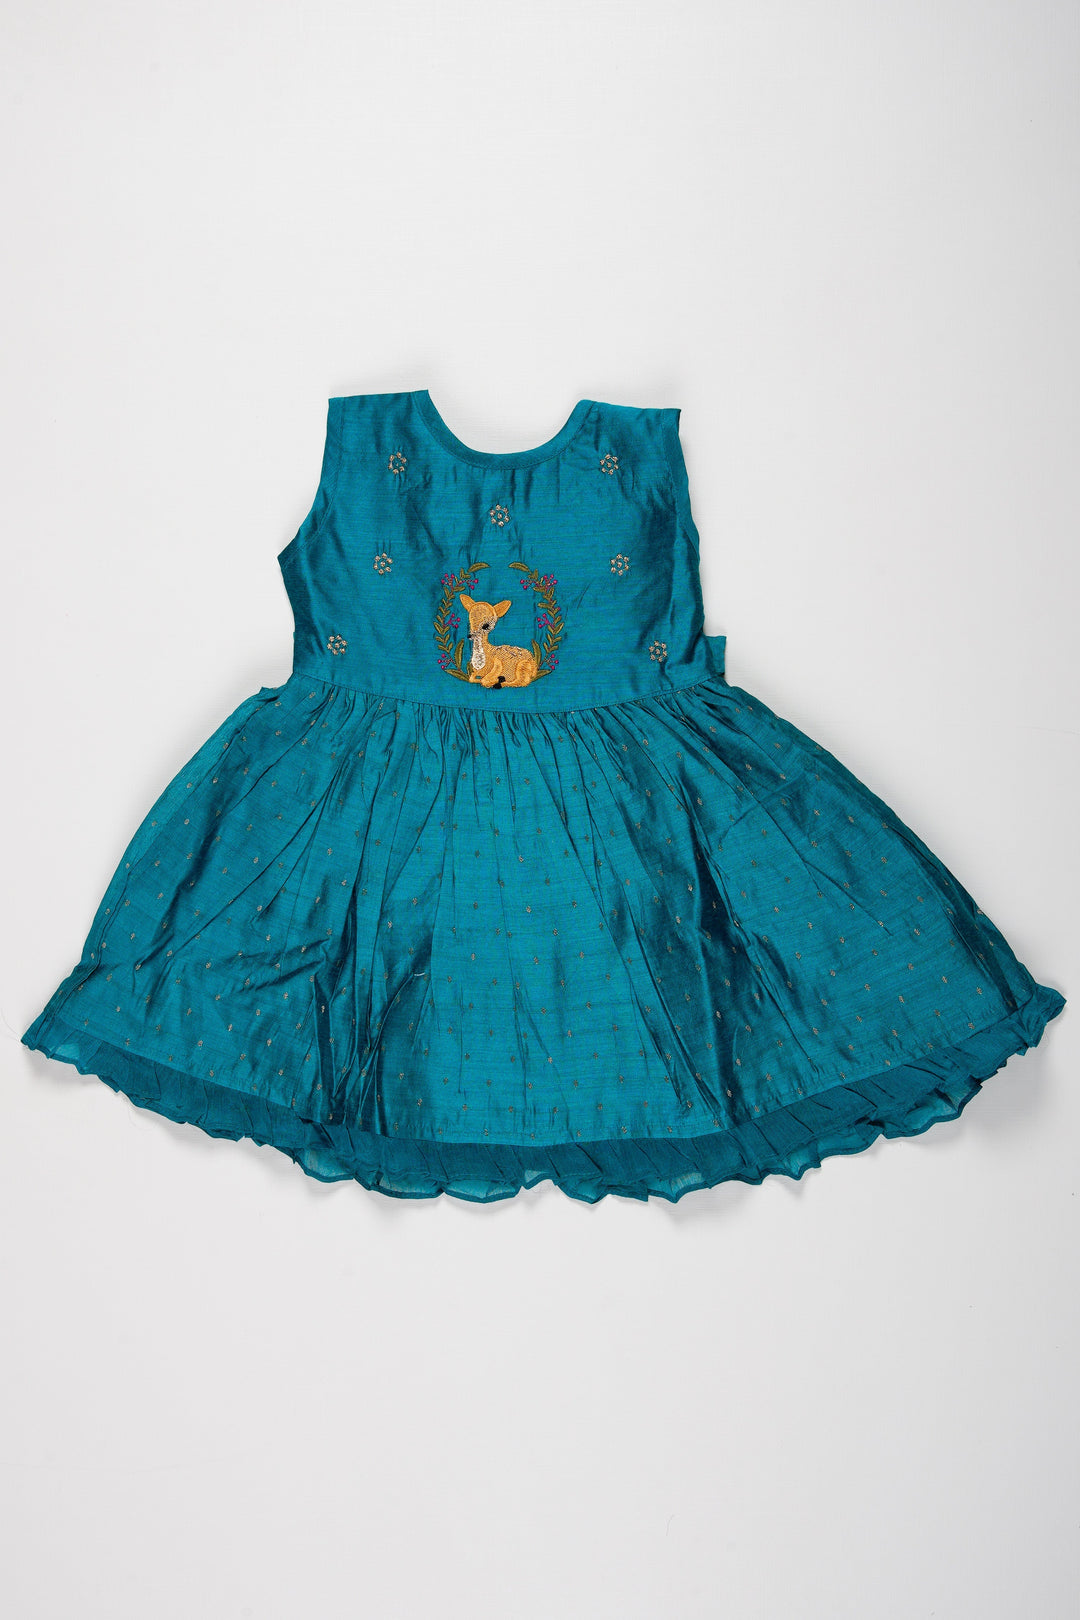 The Nesavu Girls Cotton Frock Teal Chanderi Cotton Frock with Embroidered Fawn for Young Girls Nesavu 16 (1Y) / Blue / Chanderi GFC1316A-16 Shop Teal Chanderi Cotton Frock with Fawn Embroidery for Girls | The Nesavu